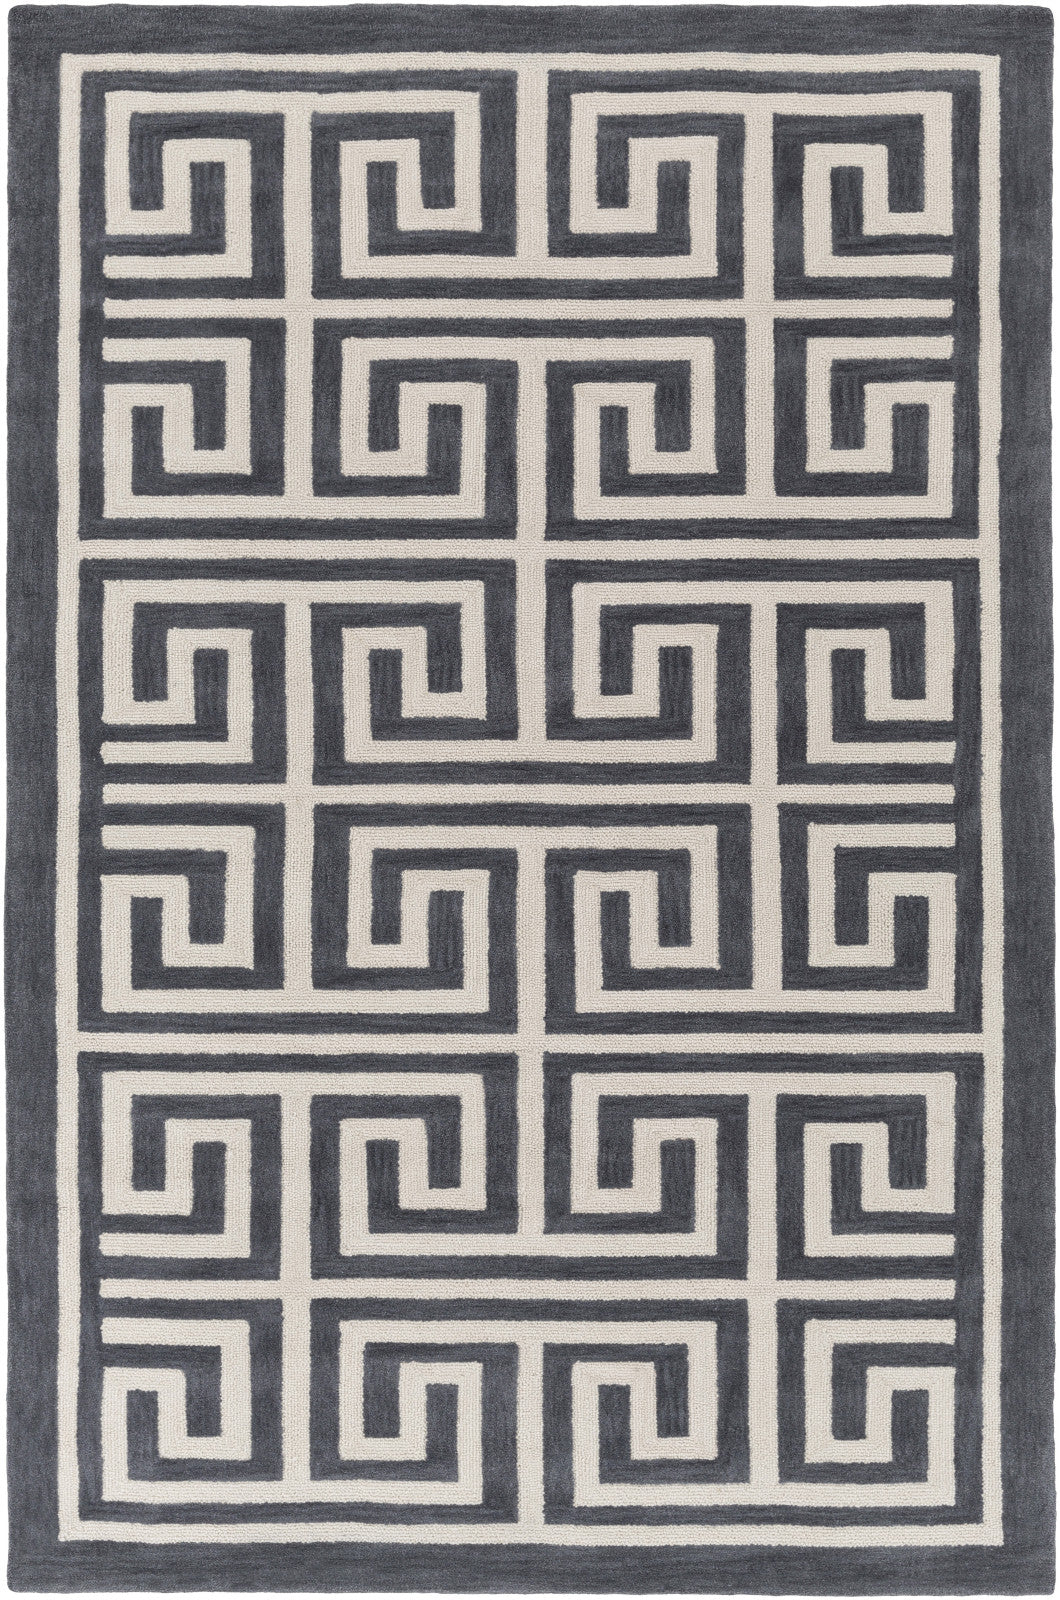 Artistic Weavers Holden Kennedy Charcoal/Ivory Area Rug main image